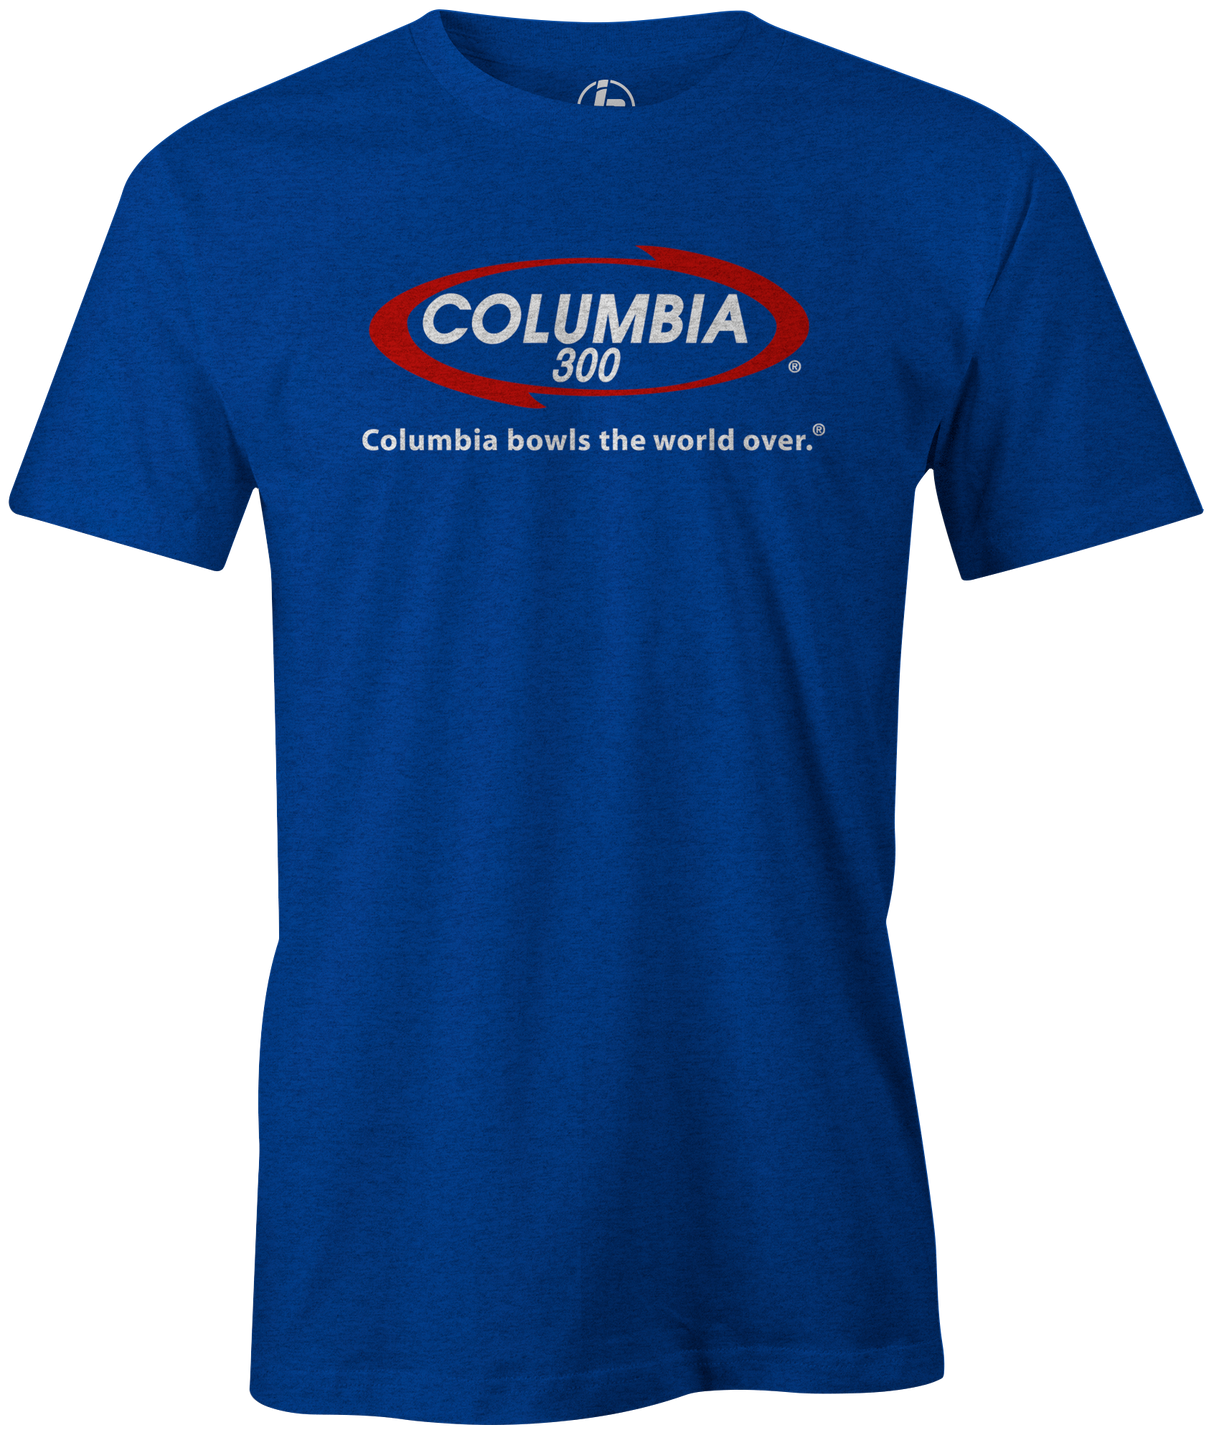 Columbia 300 Bowling T-Shirt | Bowls The World Over Blue